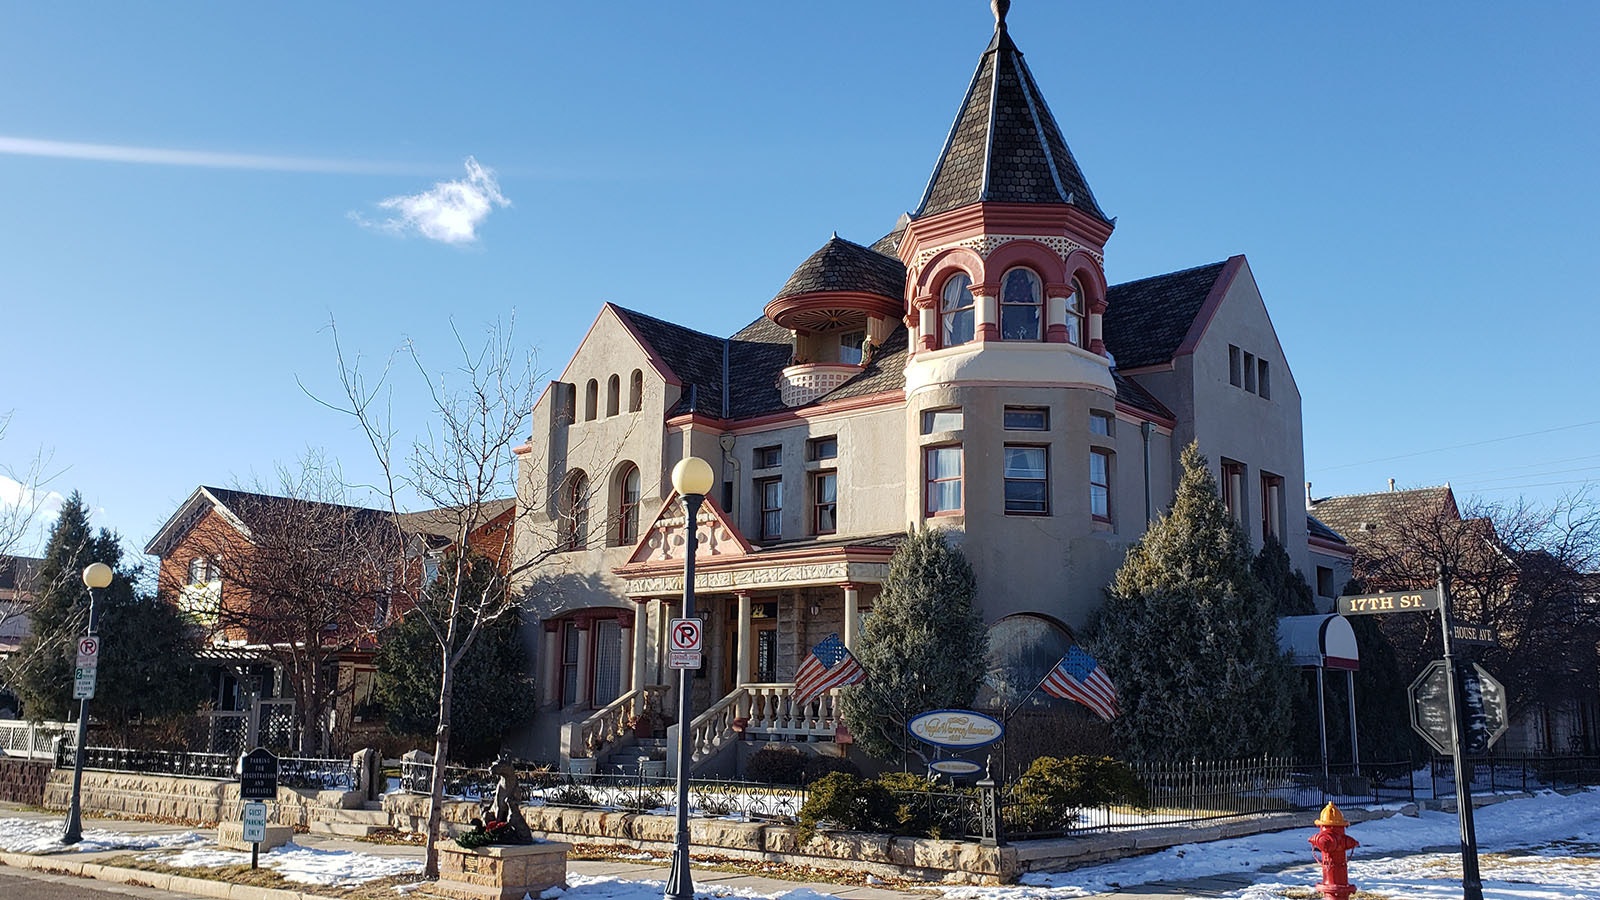 The Nagle-Warren Mansion was built on Millionaires Row by Cheyenne's merchant prince, Erasmus Nagle.